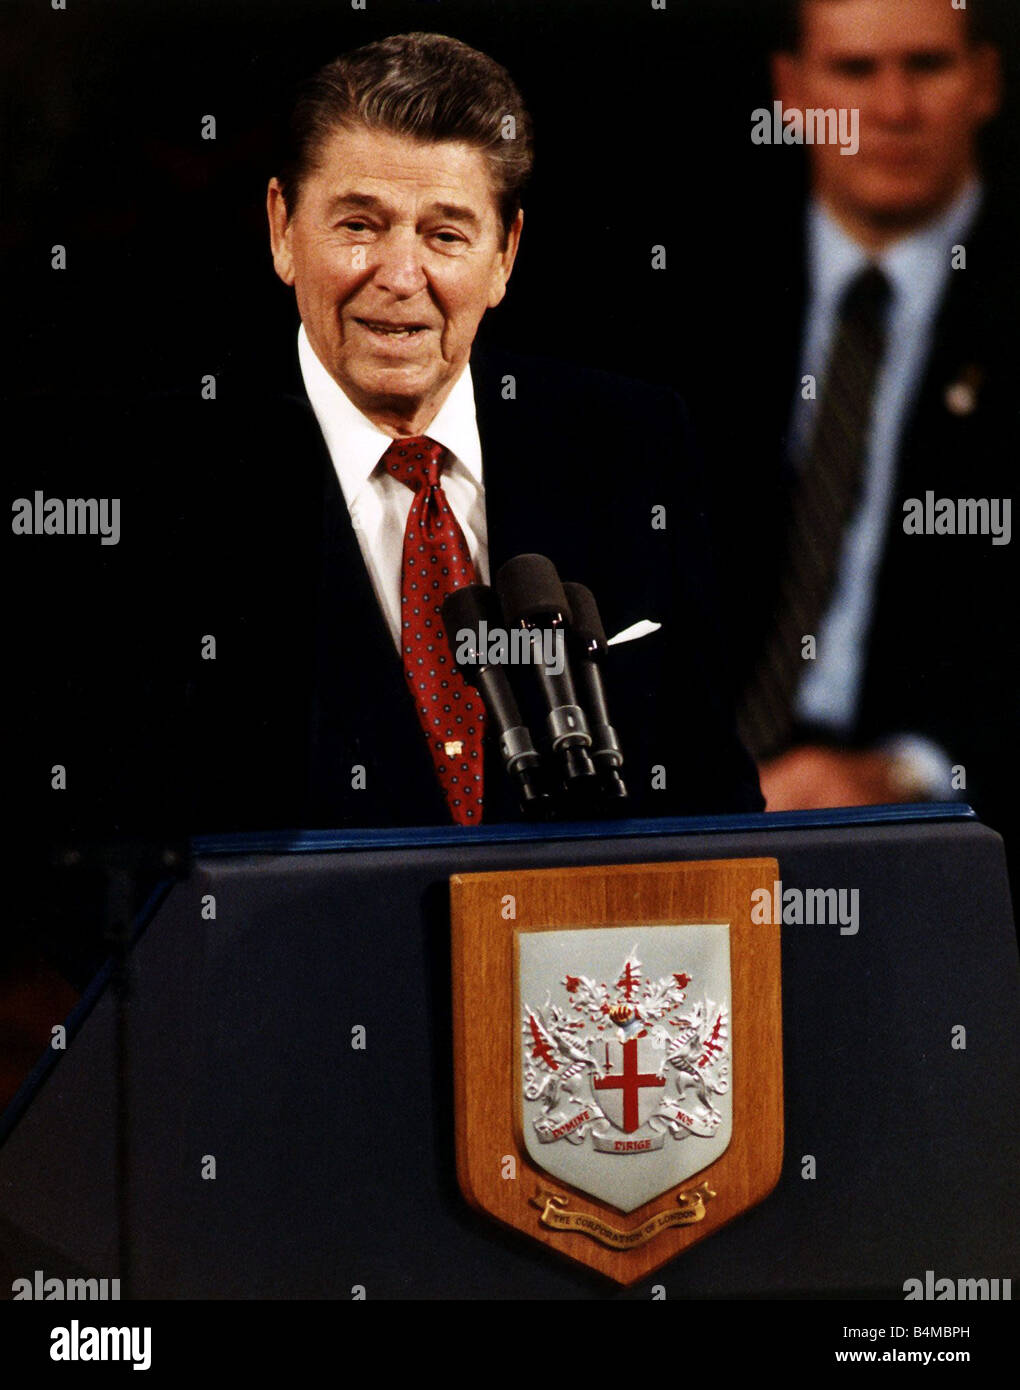 Ronald Reagan Former Actor and President of the United States Stock Photo